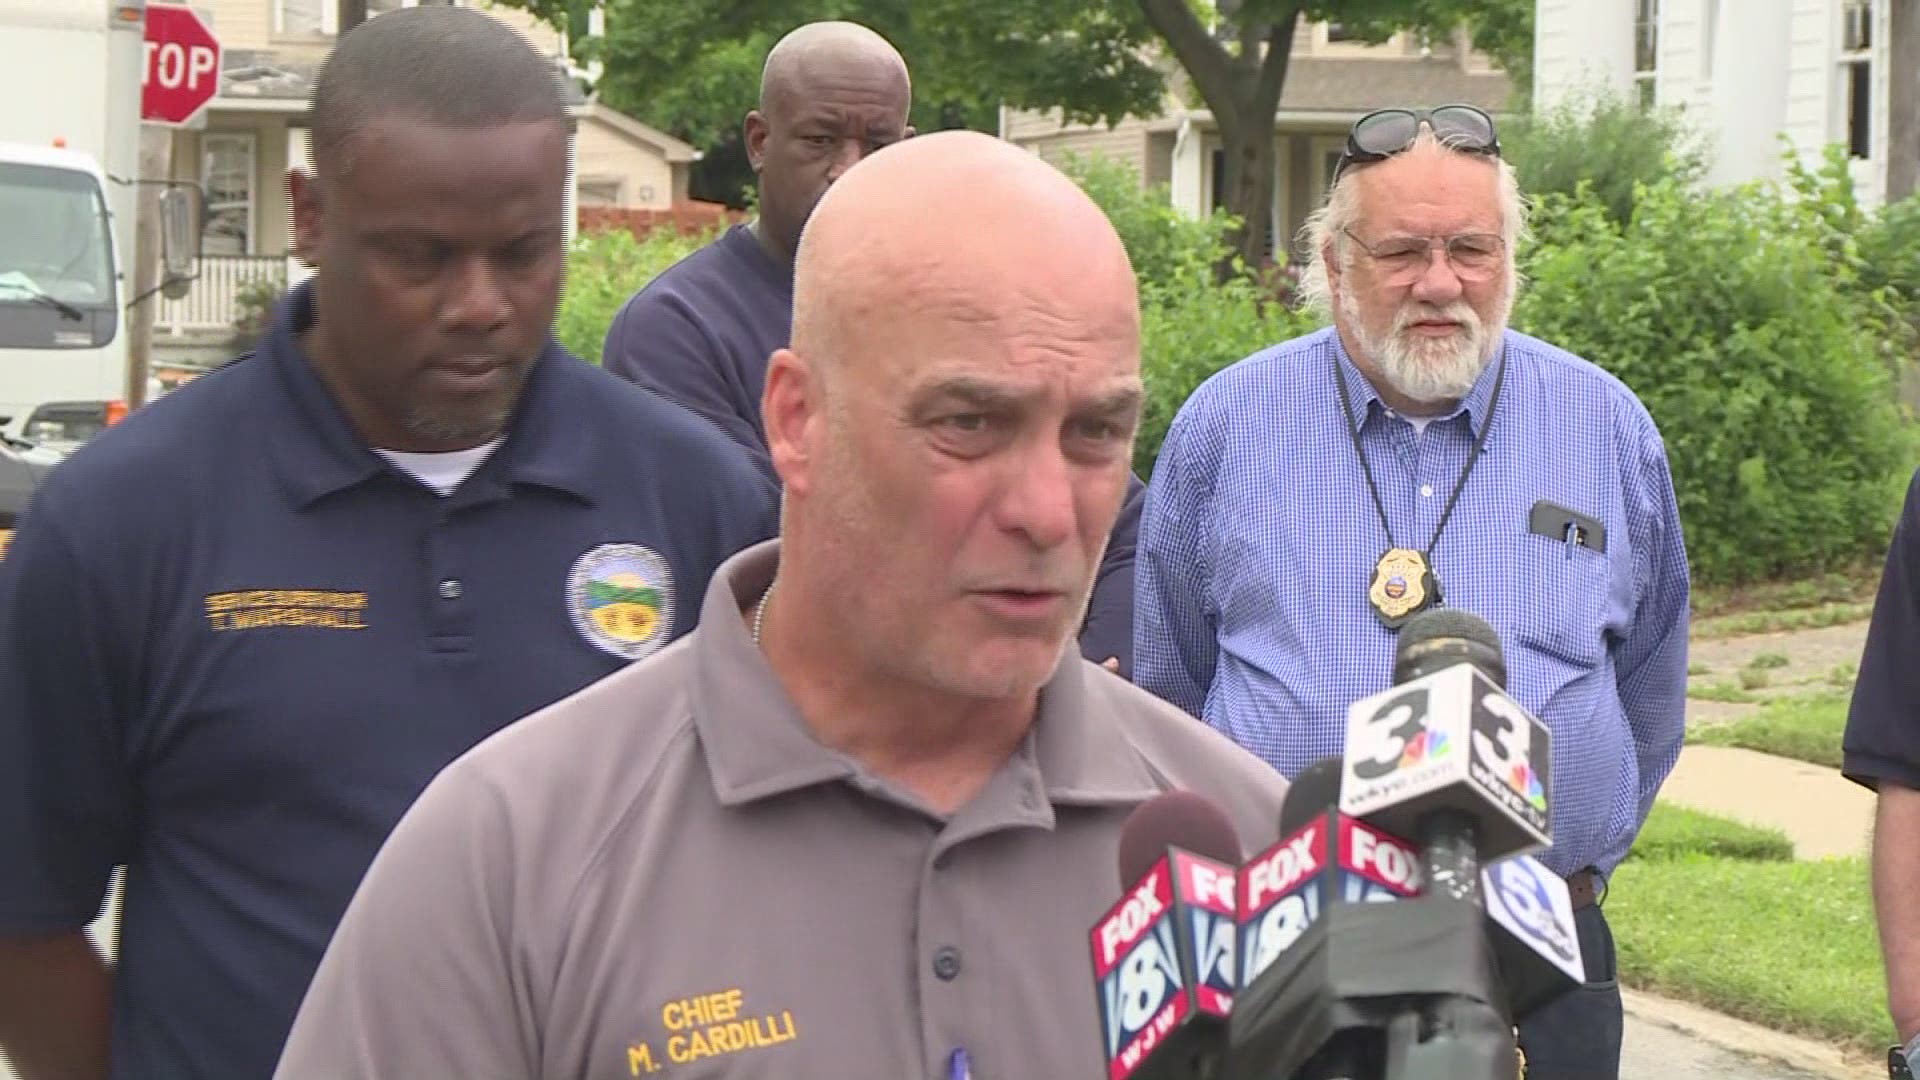 June 11, 2018: Authorities held a press conference to discuss new information connected to the deadly East Cleveland house explosion.